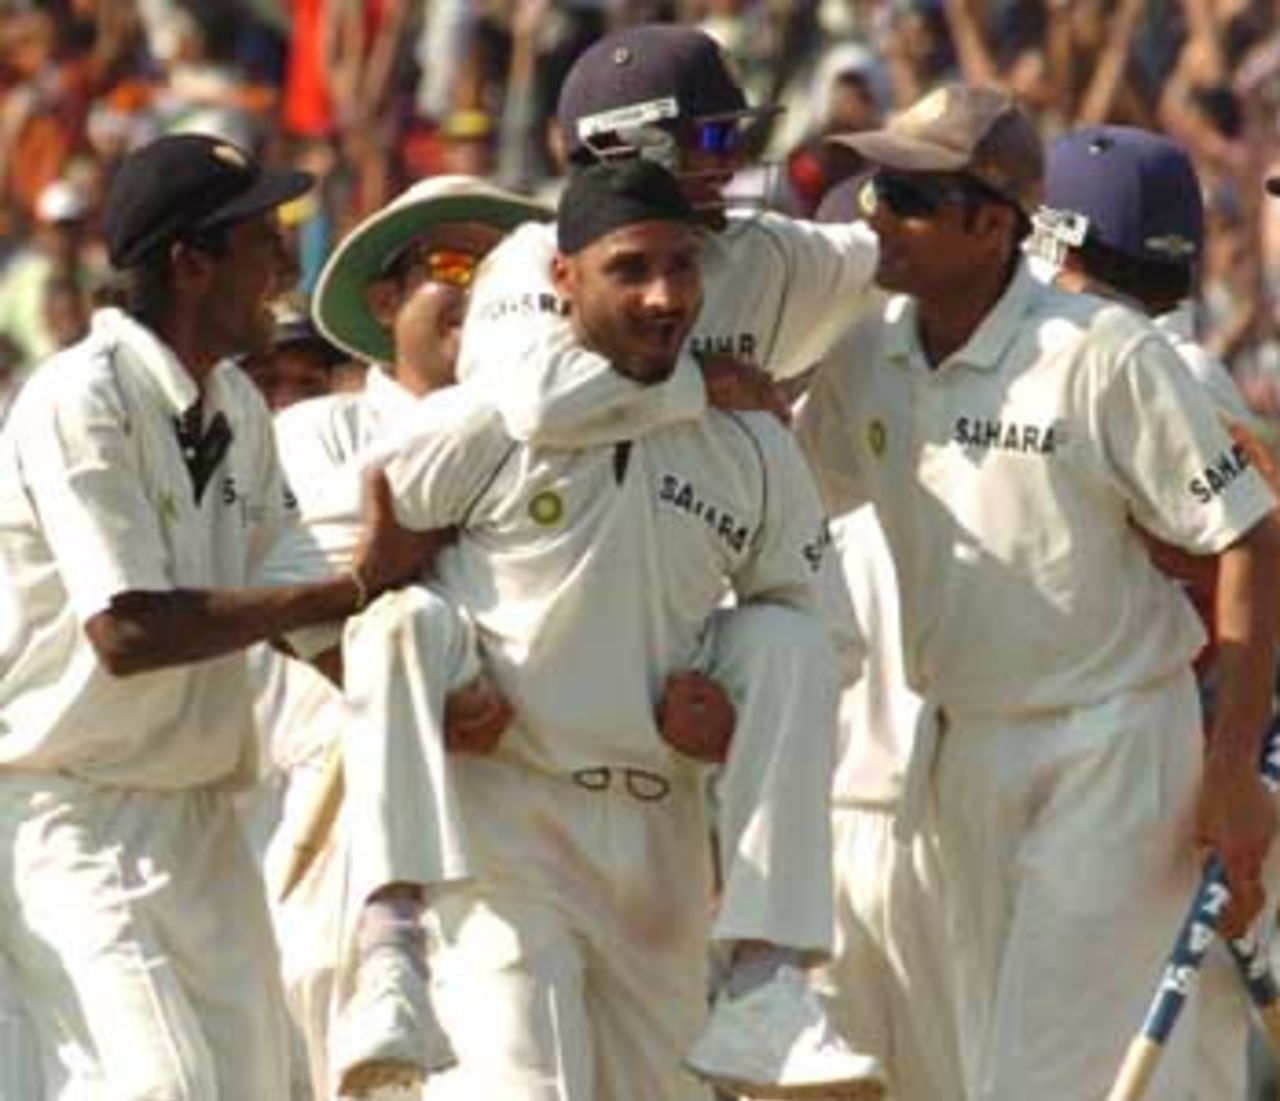 Harbhajan Singh - the man who was said to hold the key to India's success at 'The Eden', finished with just two wickets in the Pakistan first innings - when he dismissed Kamran Akmal, he overtook Erapalli Prasanna's tally of 189 wickets, to become India's leading off spinner